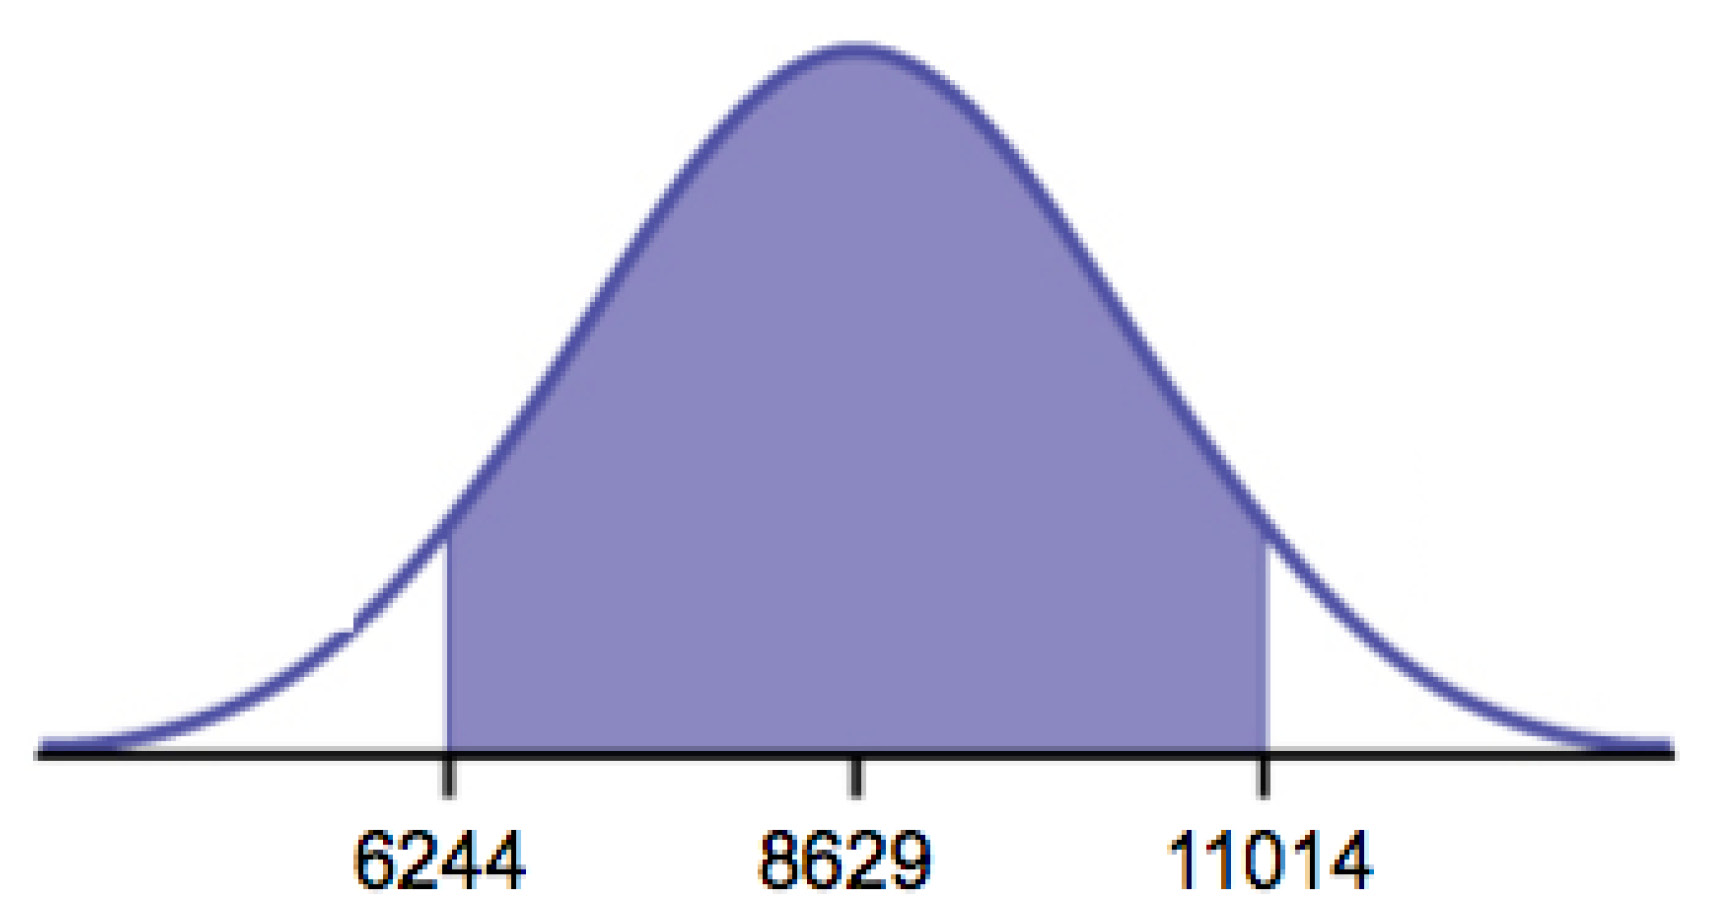 This is a normal distribution curve. The peak of the curve coincides with the point 8,629 on the horizontal axis. A central region is shaded between points 6,244 and 11,014.